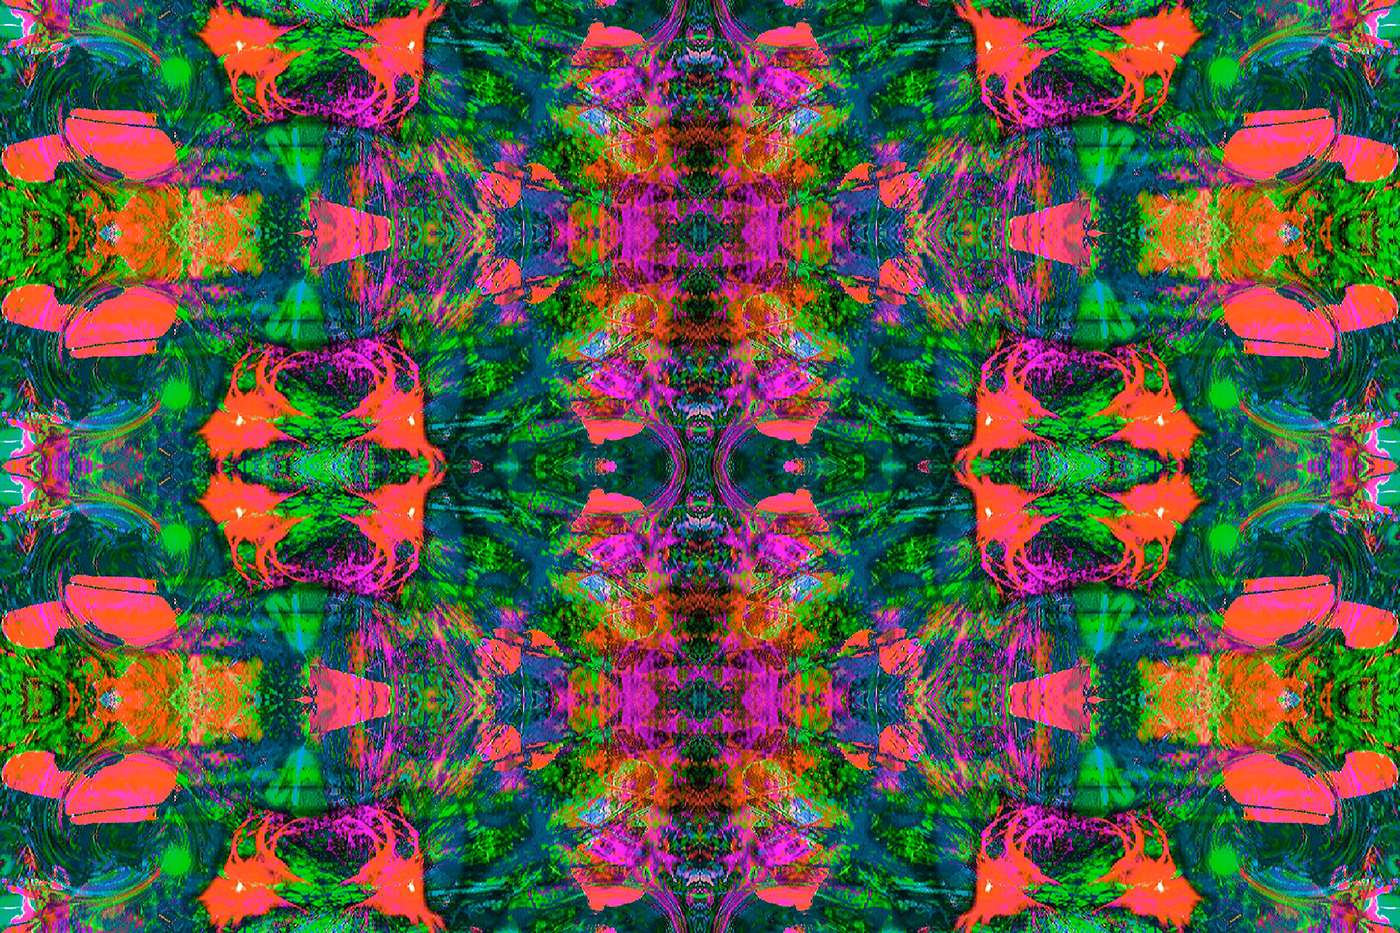 psychedelic 60's abstract pattern abstract patterns fluorescent Digital Art 